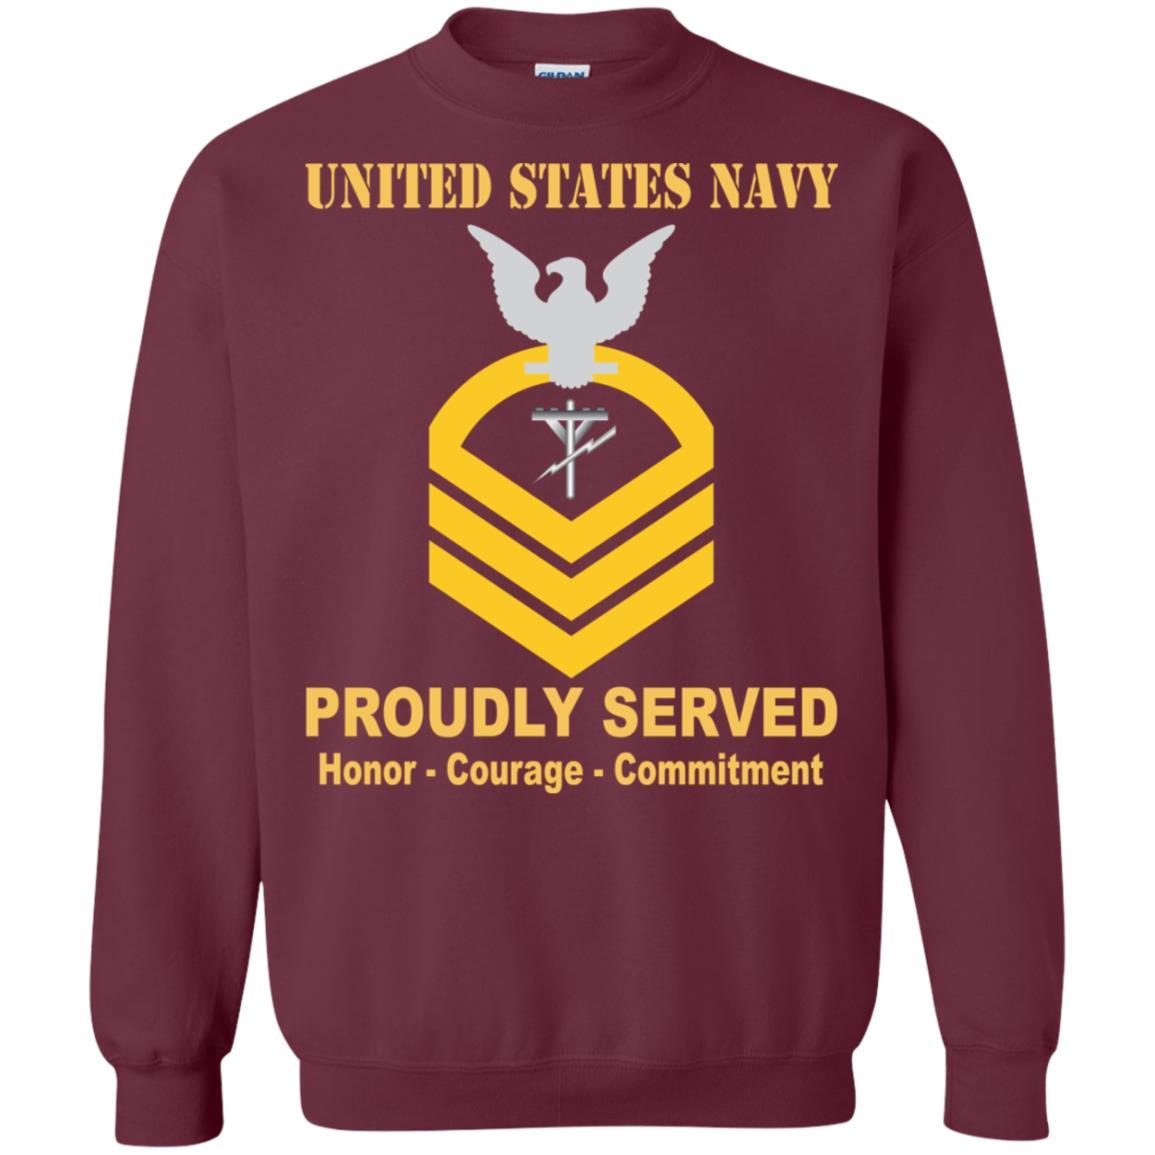 Navy Construction Electrician Navy CE E-7 Rating Badges Proudly Served T-Shirt For Men On Front-TShirt-Navy-Veterans Nation